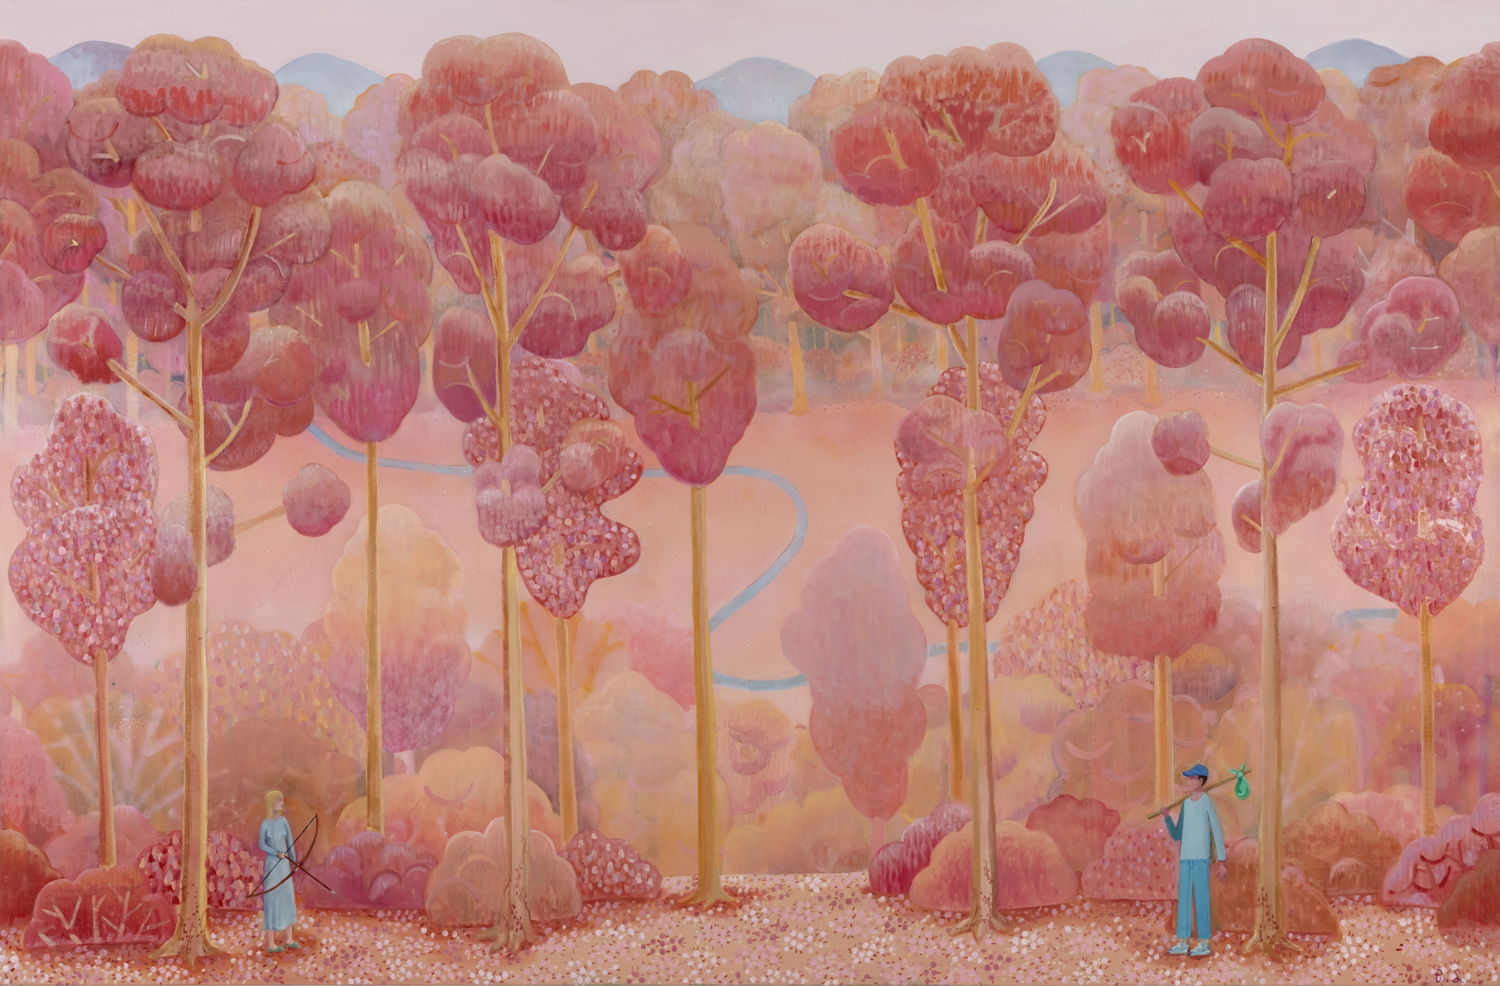 BEN SLEDSENS, The huntswoman and the wanderer, 2020. Oil and acrylic on canvas, 190 x 290 cm. Courtesy Tim Van Laere Gallery, Antwerp